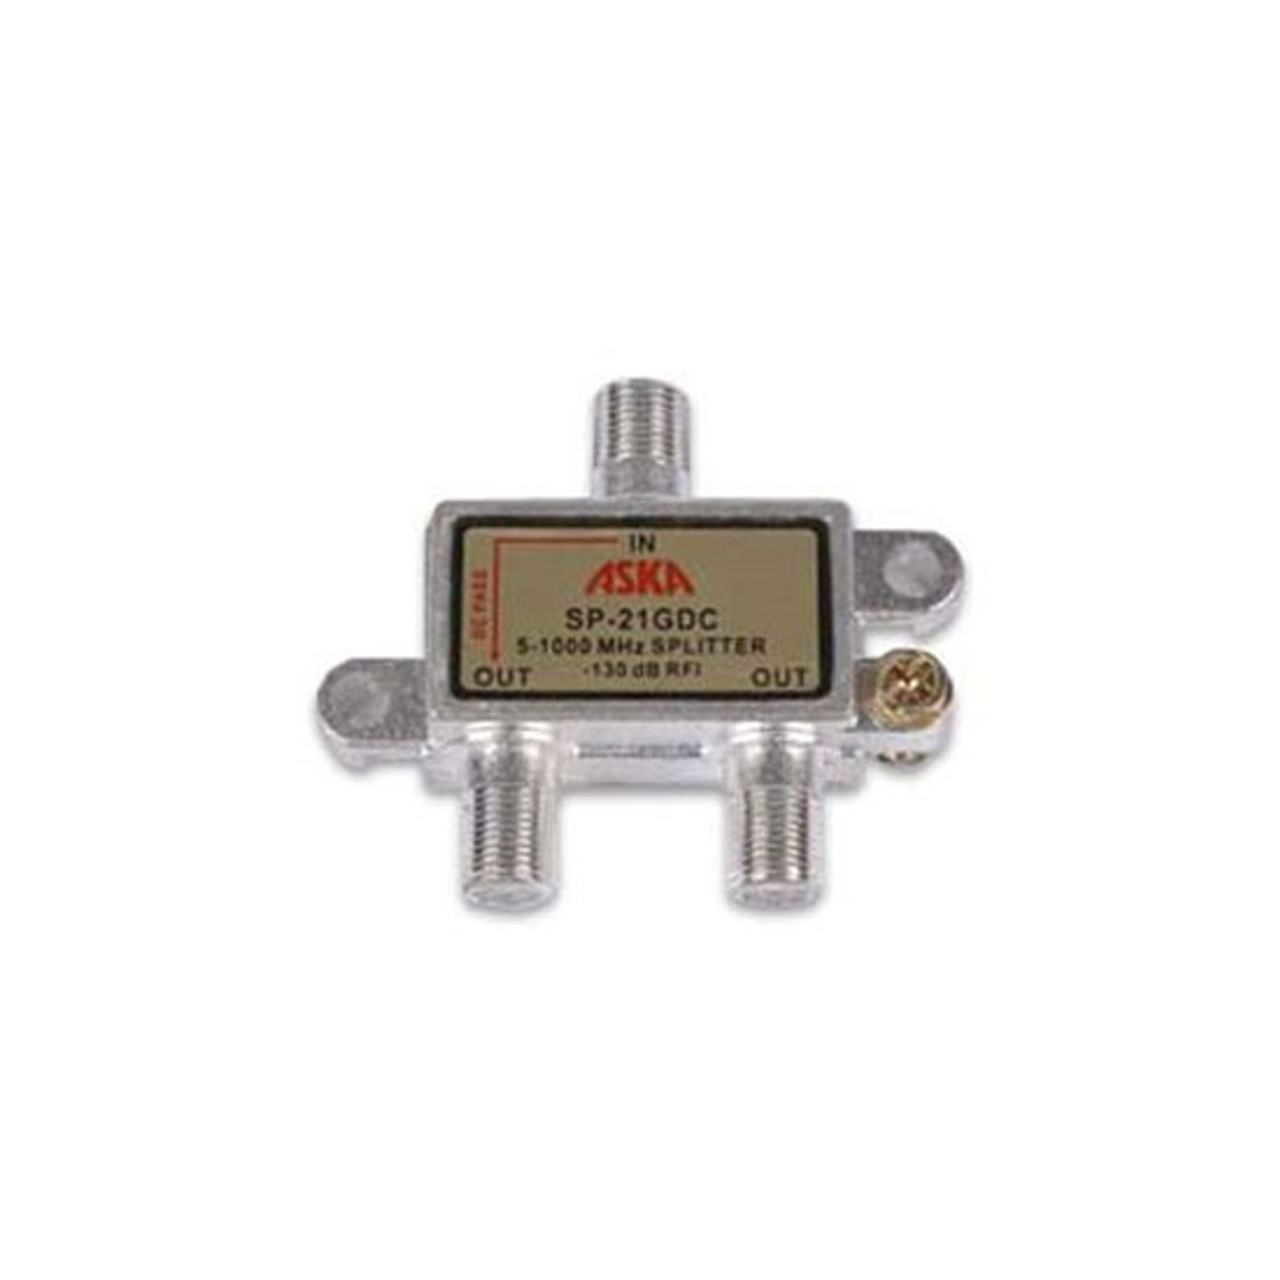 Aska SP-21GDC 2 Way Splitter 5-1000 MHz 1 GHz 1 Port Power Passive Low Band RF Shielded F-Type High Frequency Video Coaxial Cable Digital Receiver TV Antenna Signal Combiner 5-1000 MHz F-Splitters